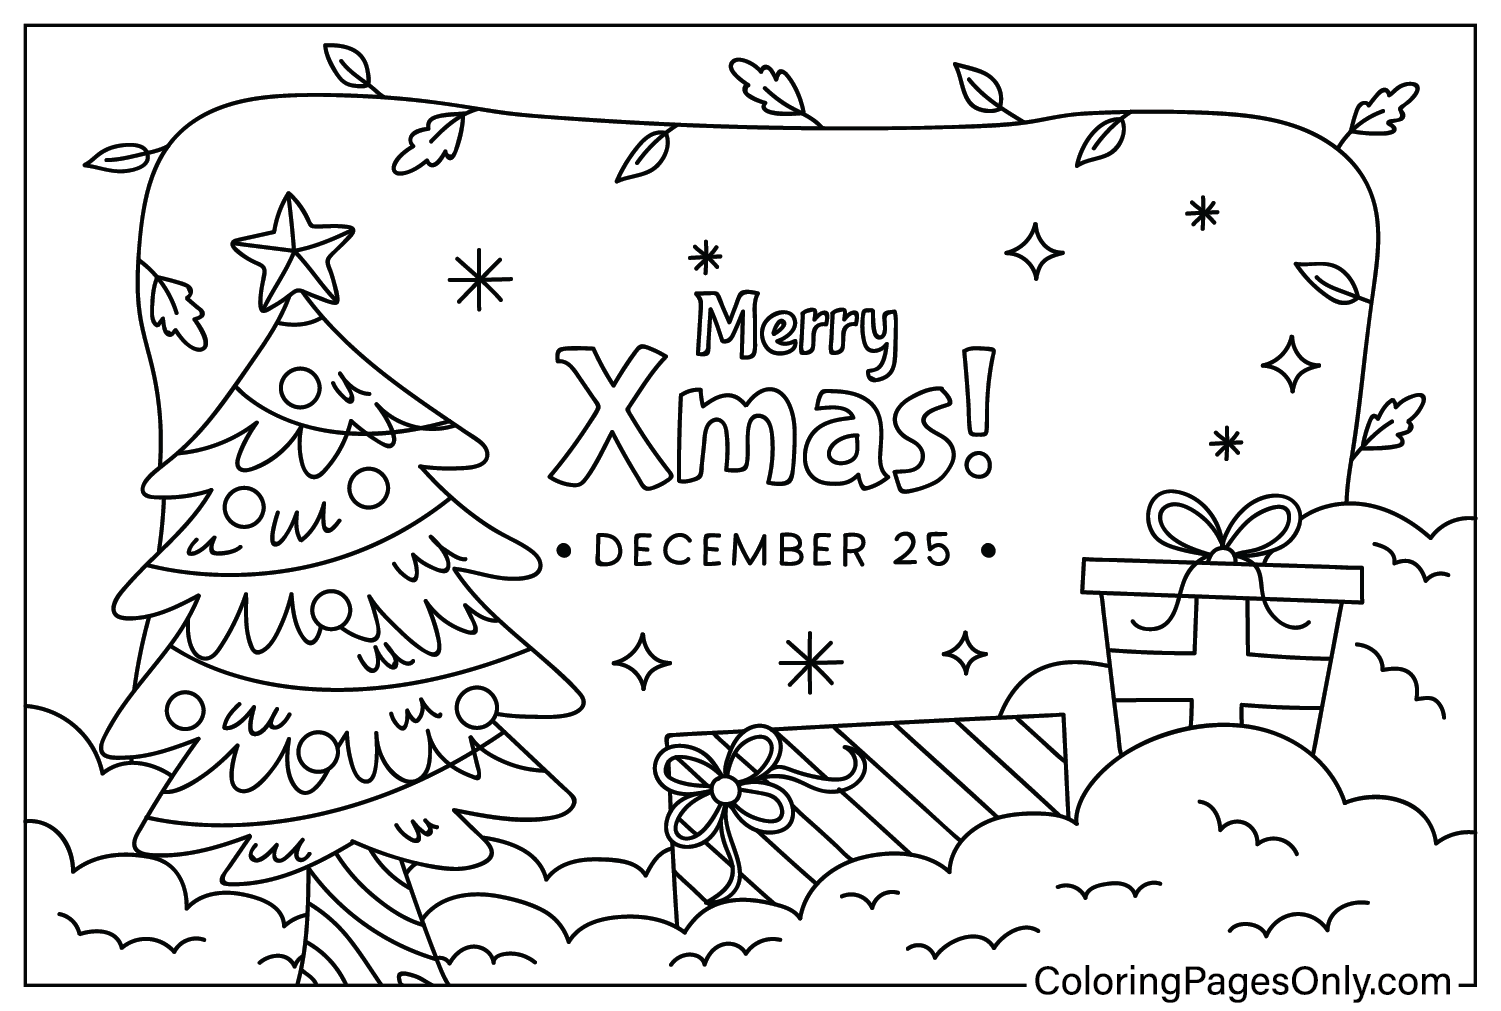 Christmas Wallpaper Coloring Pages to Printable from Christmas Wallpaper